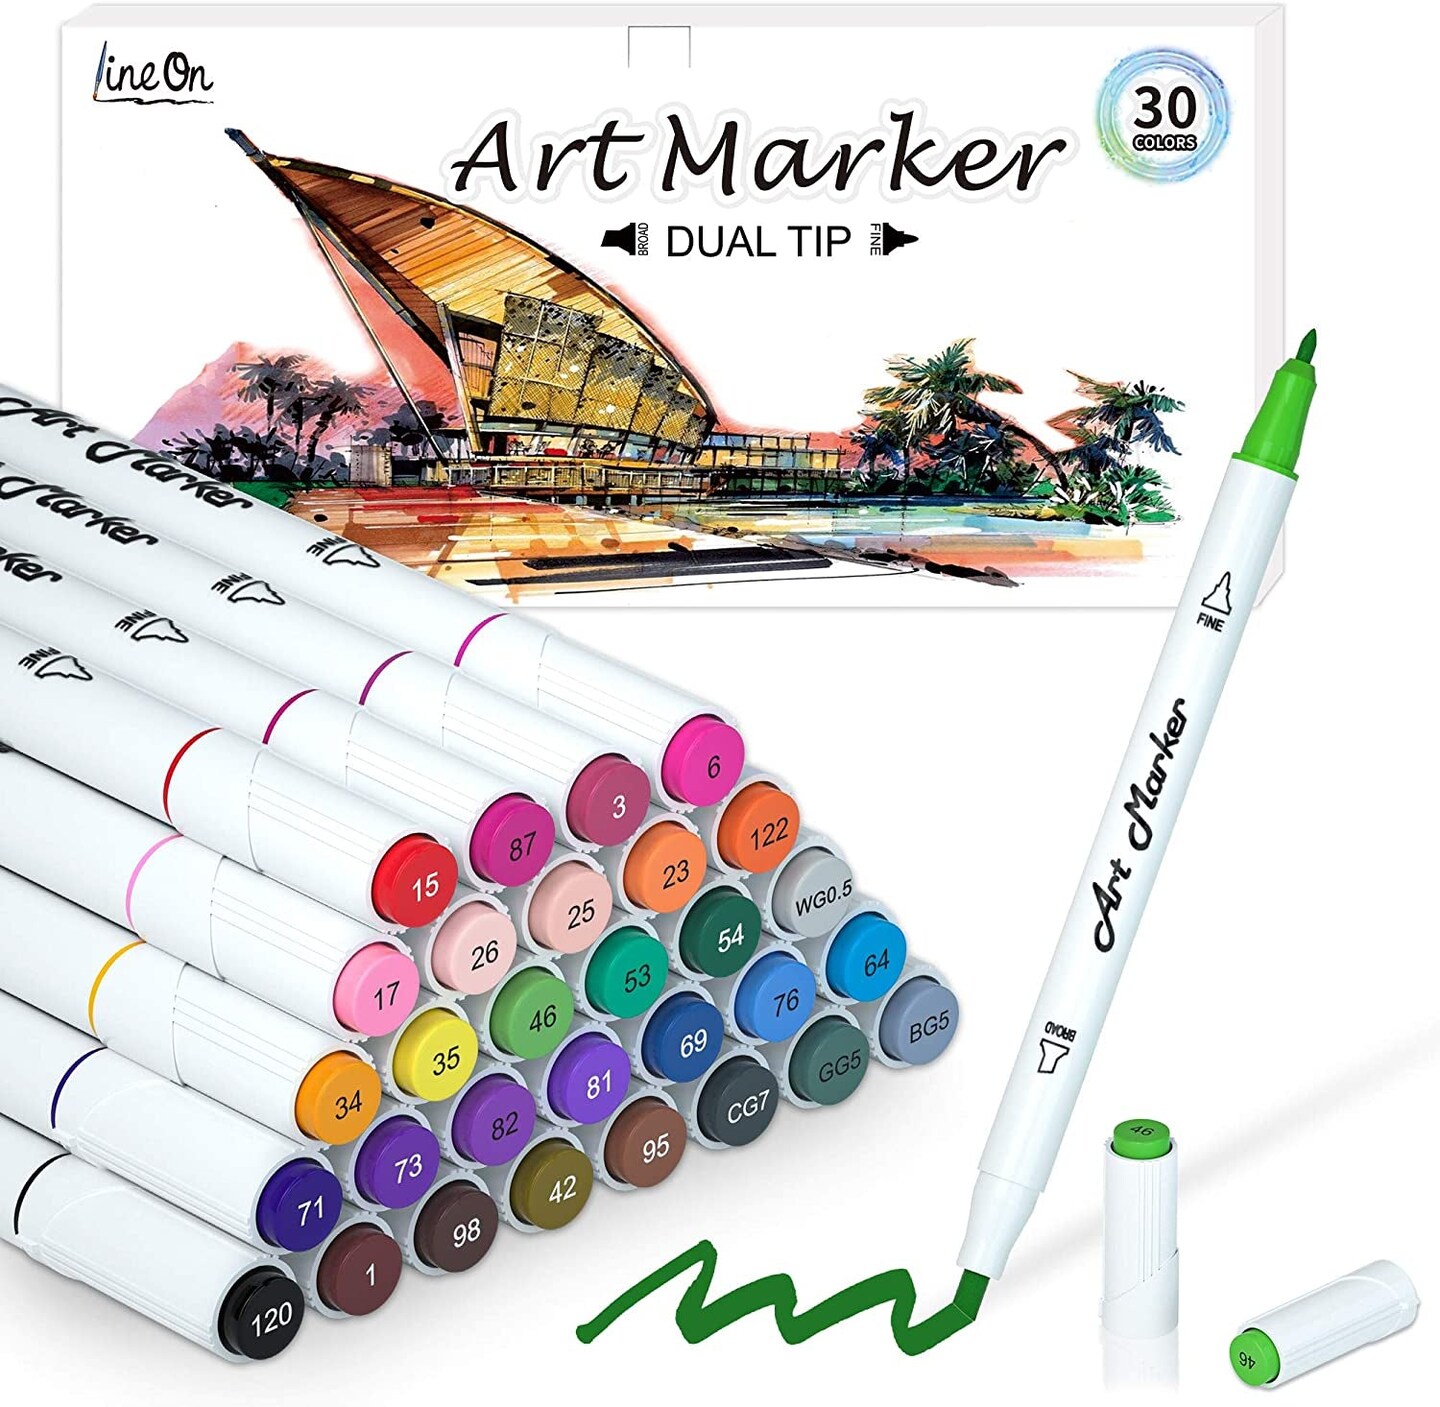 American Crafts Creative Zen Adult Coloring Markers 5/Pkg Primary